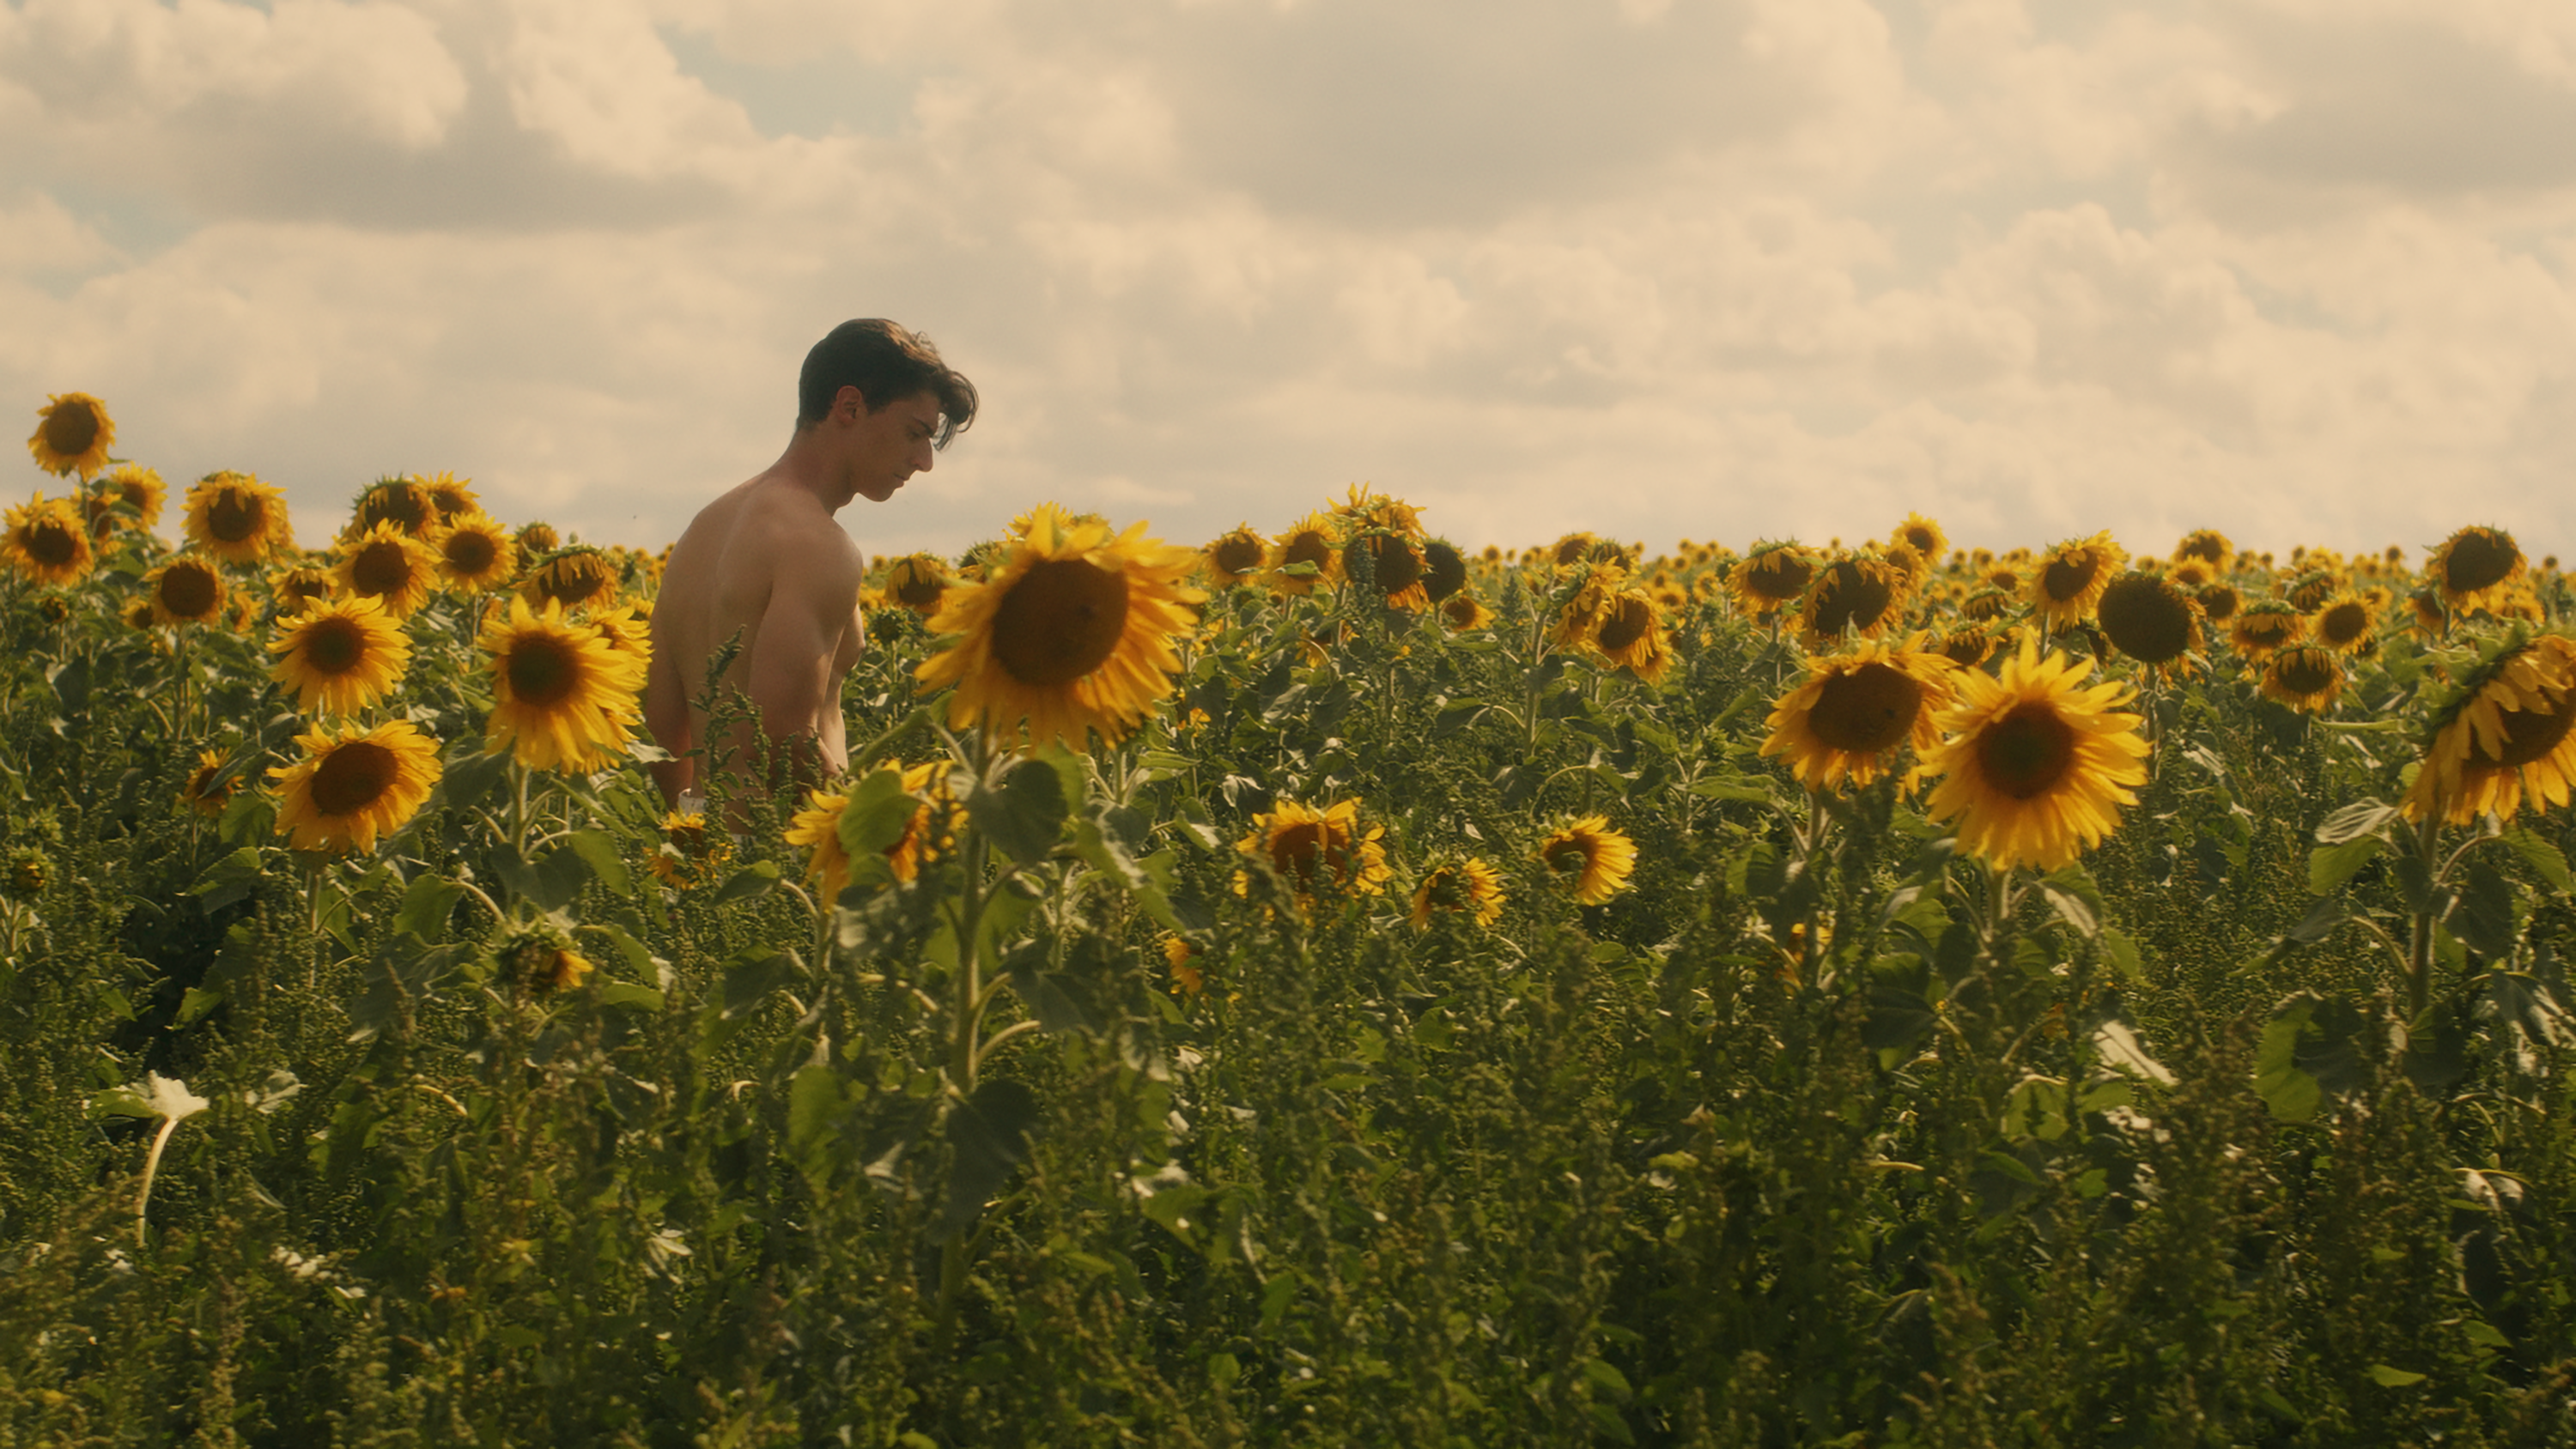 A shirtless man stands in a field, surrounded by sunflowers.